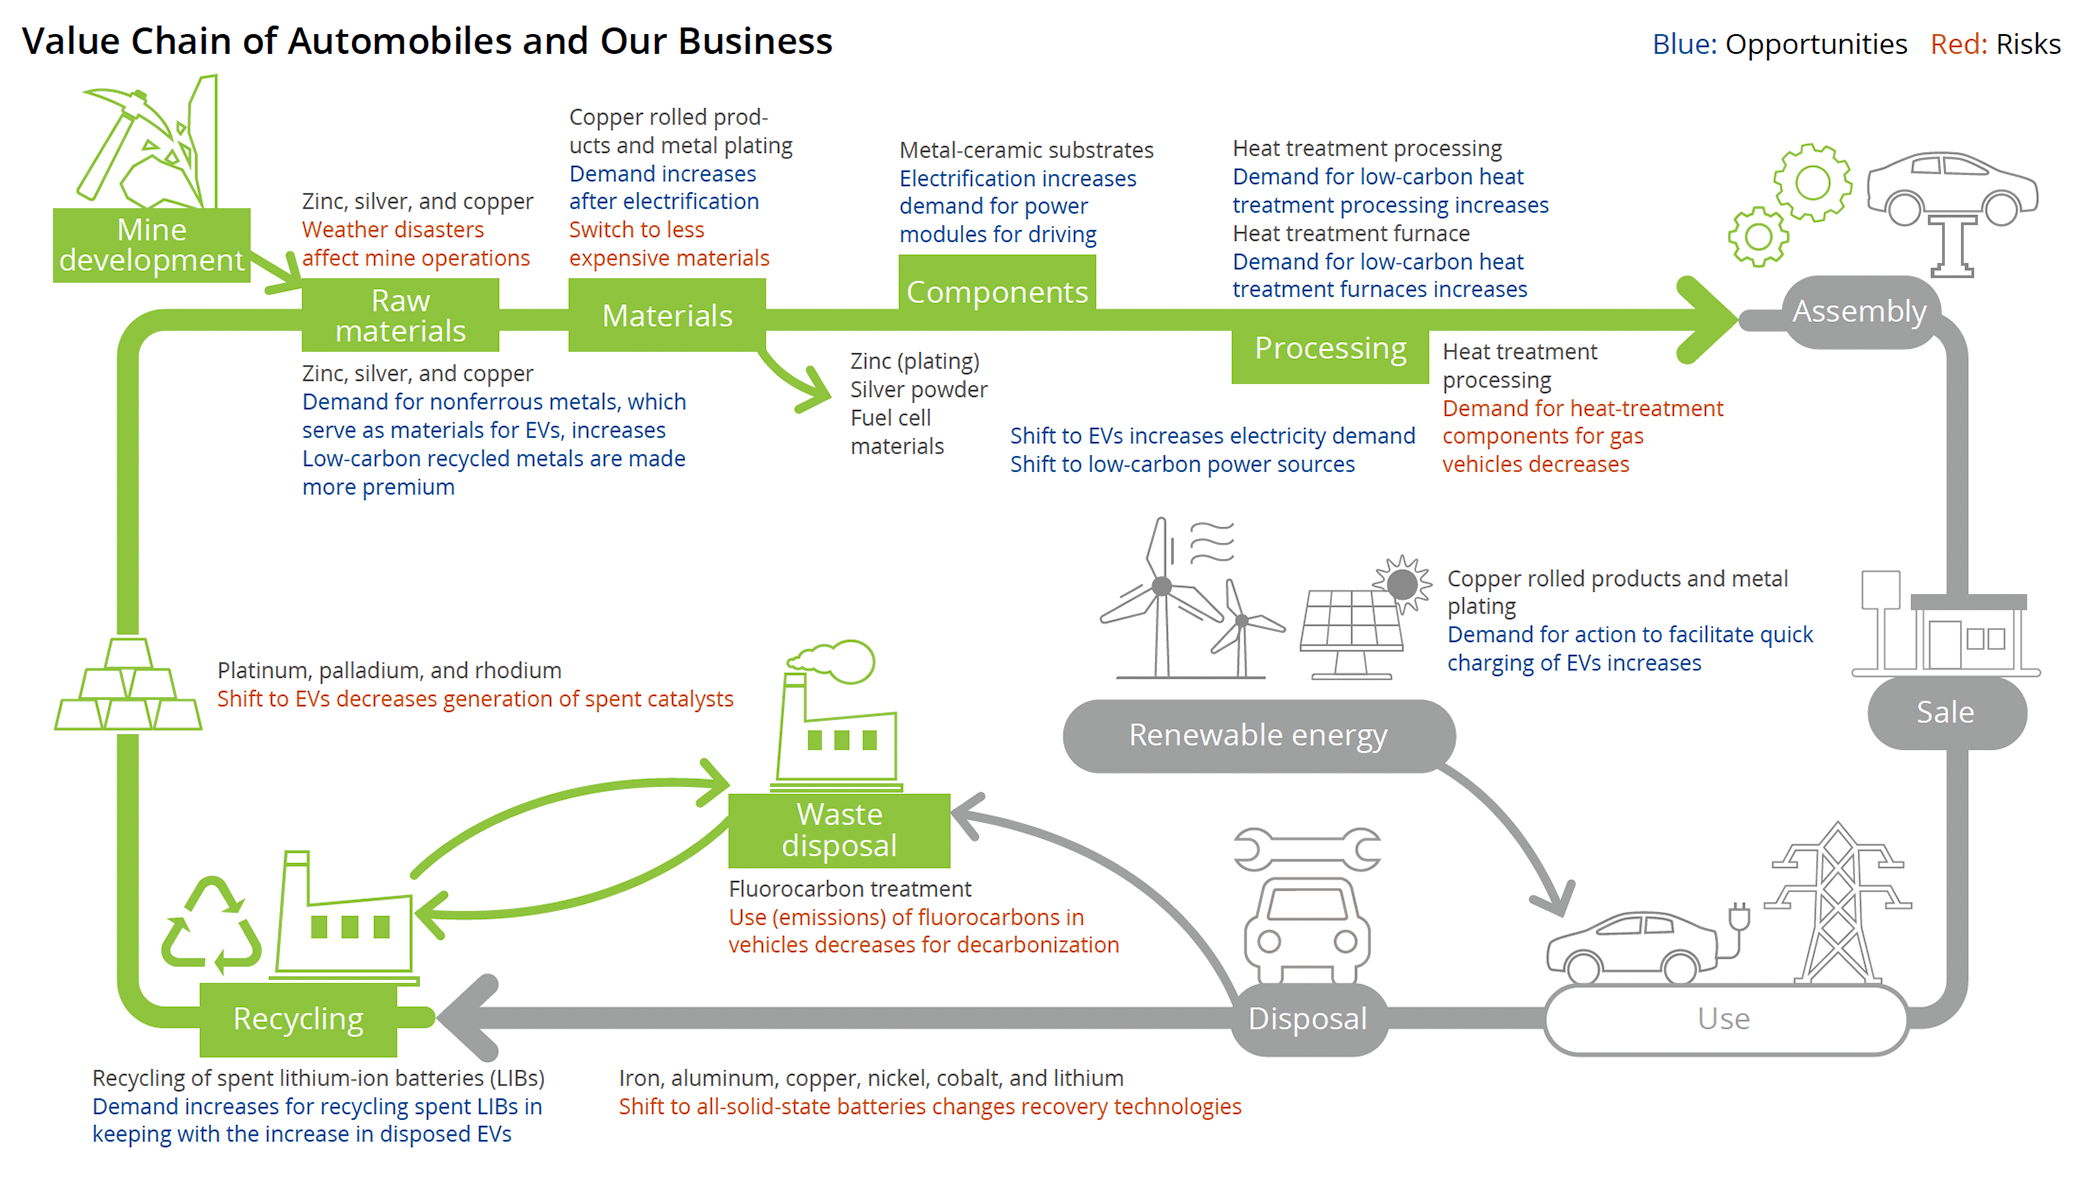 Value Chain of Automobiles and Our Business